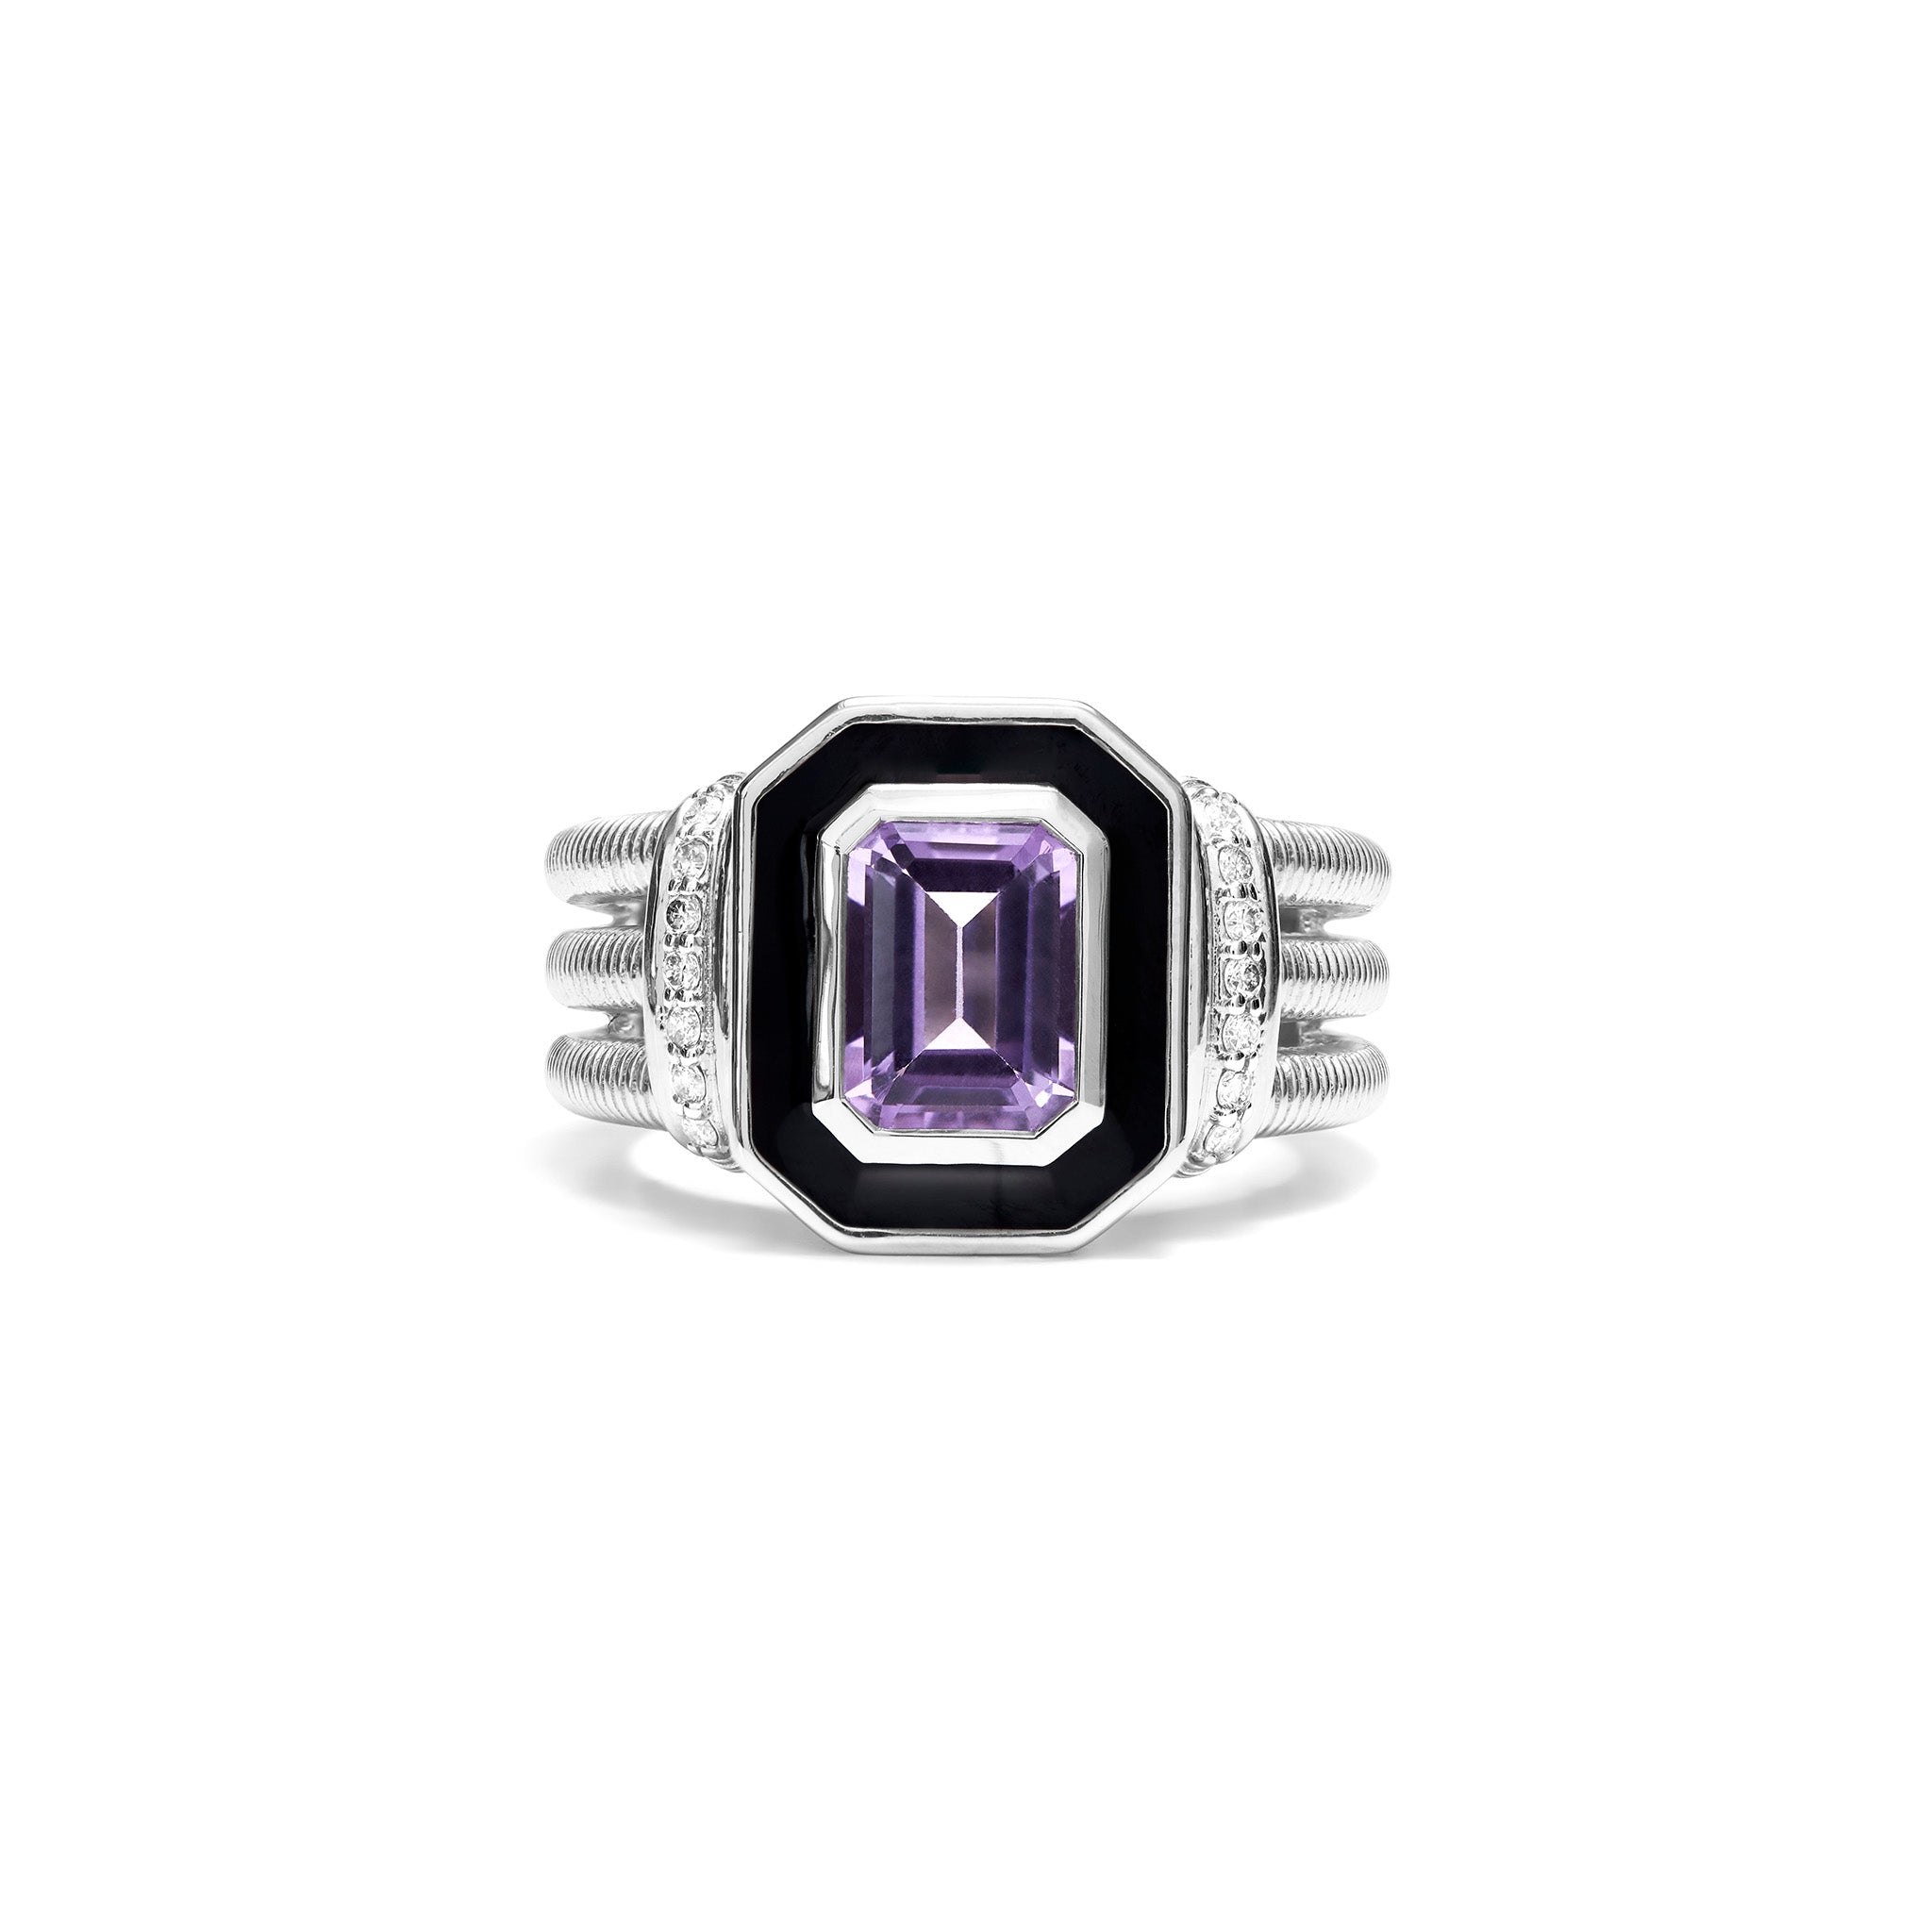 Adrienne Ring with Enamel, Amethyst and Diamonds